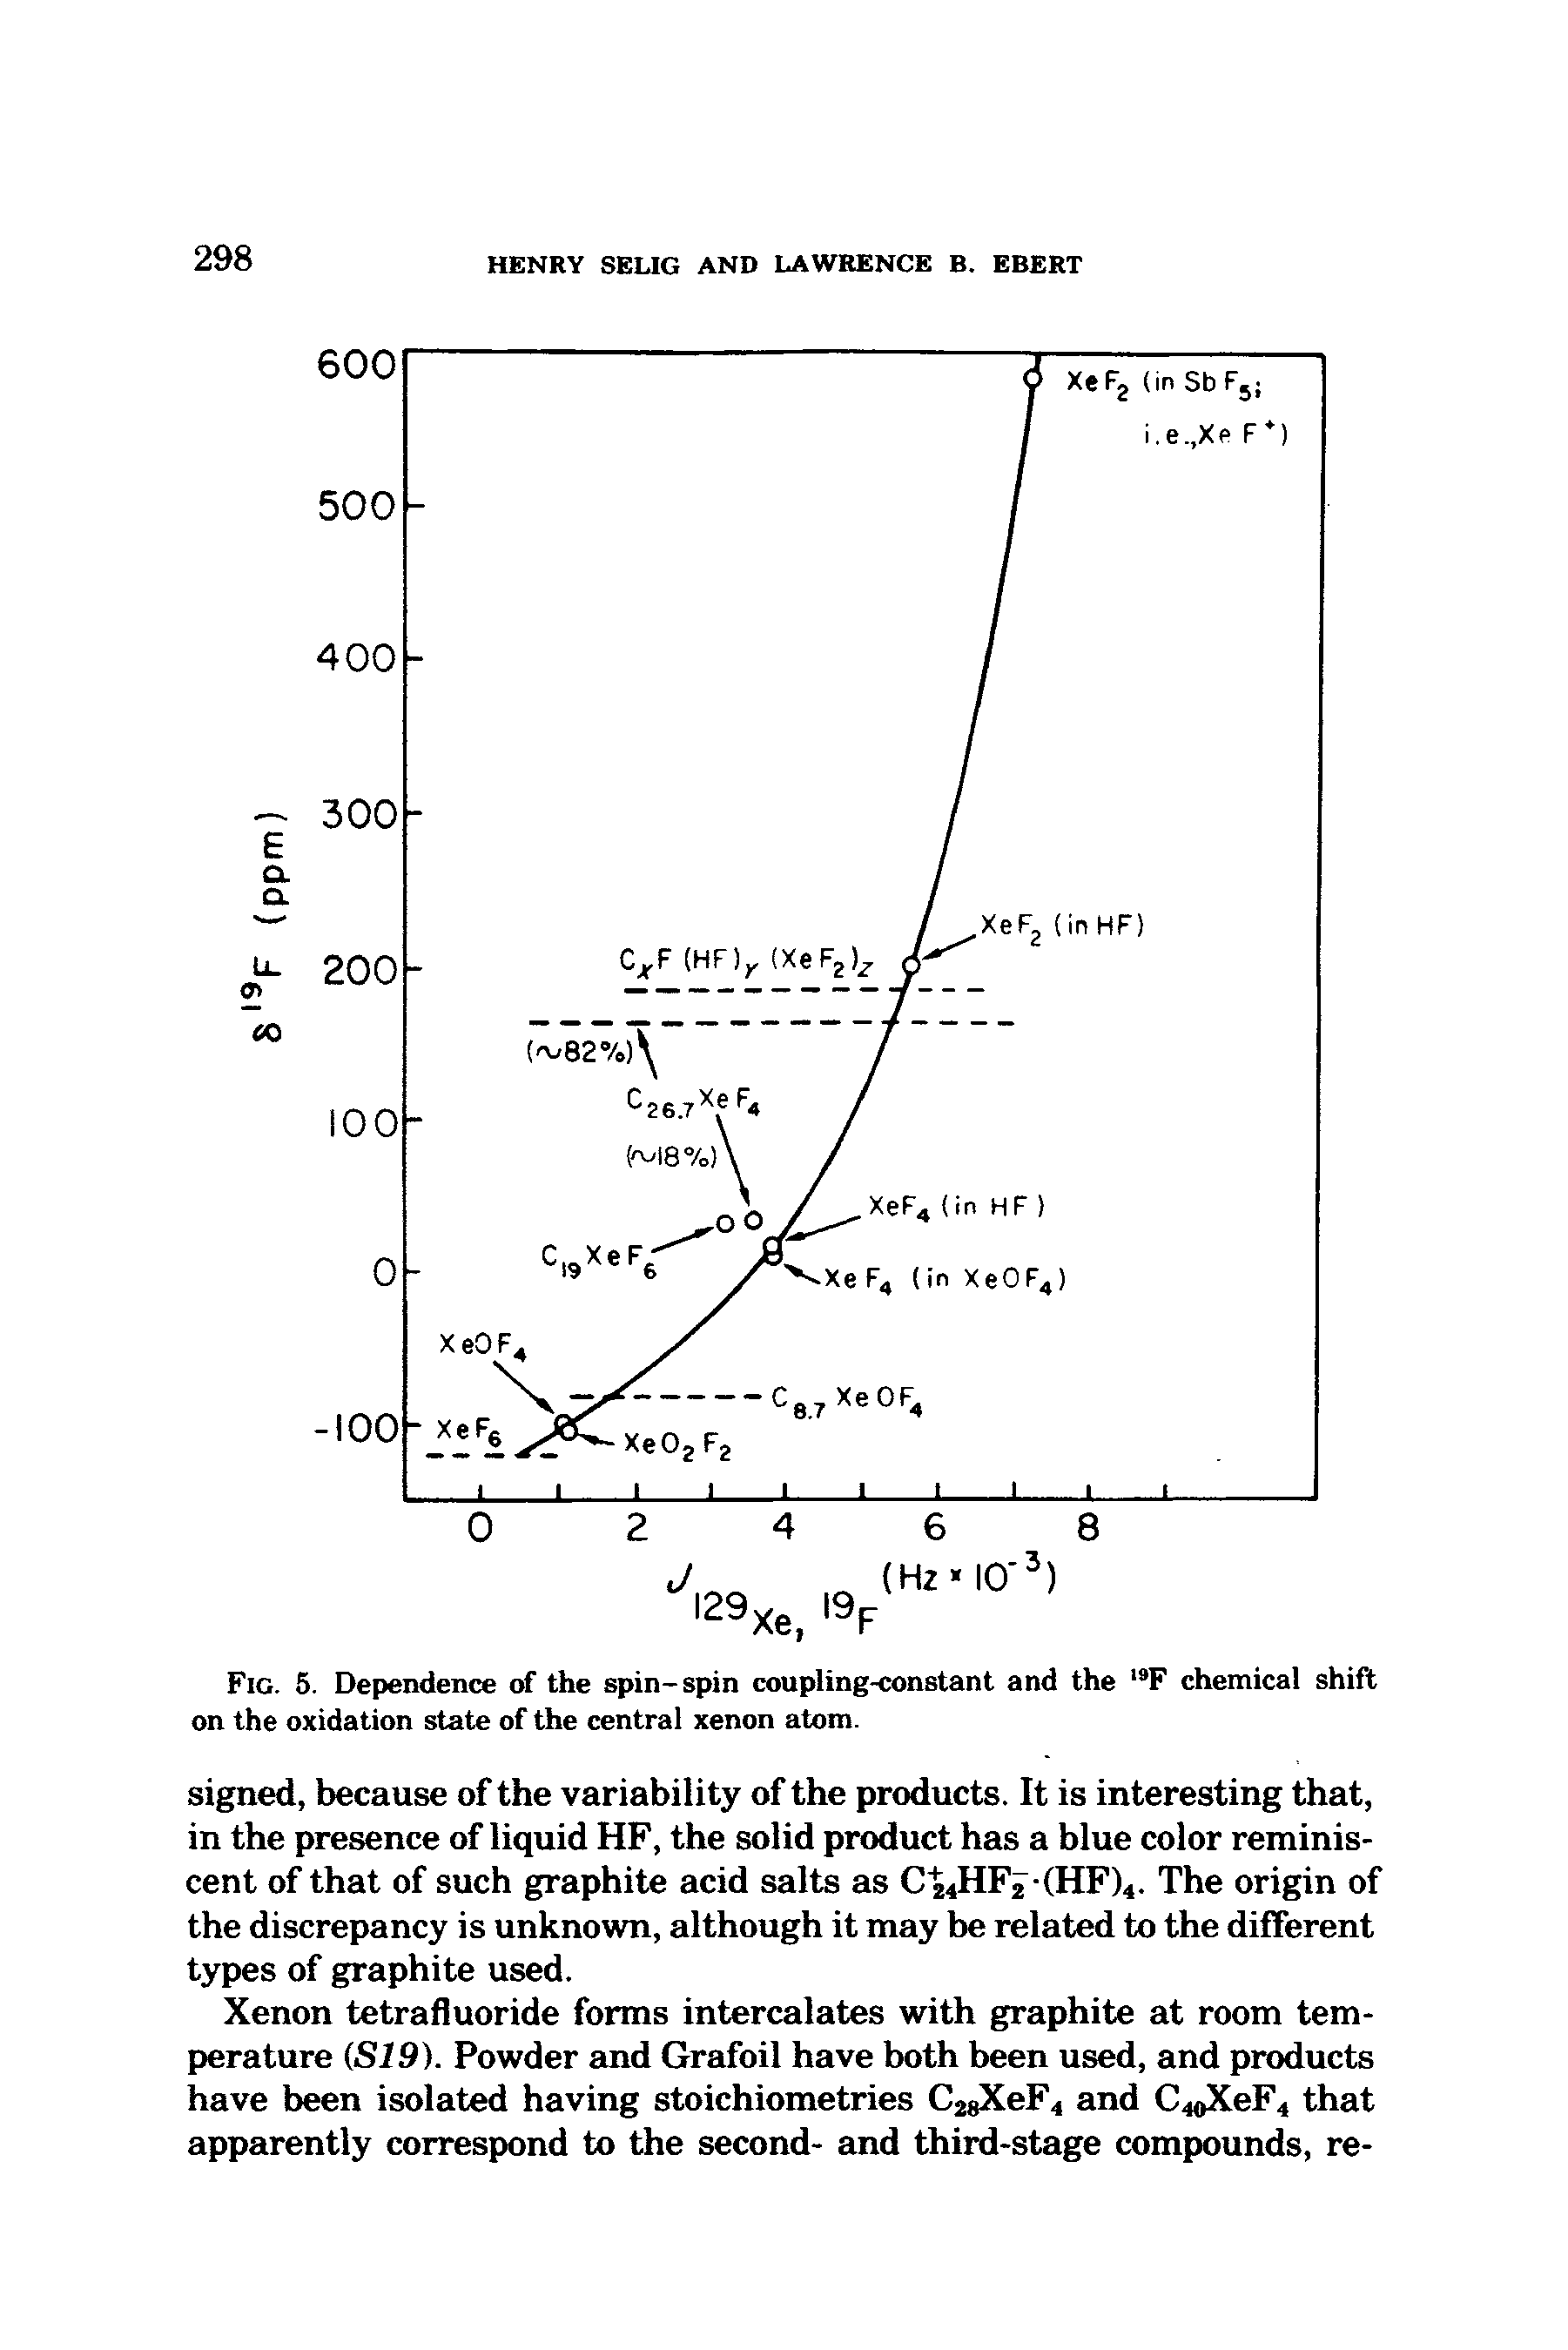 Fig. 5. Dependence of the spin-spin coupling-constant and the F chemical shift on the oxidation state of the central xenon atom.